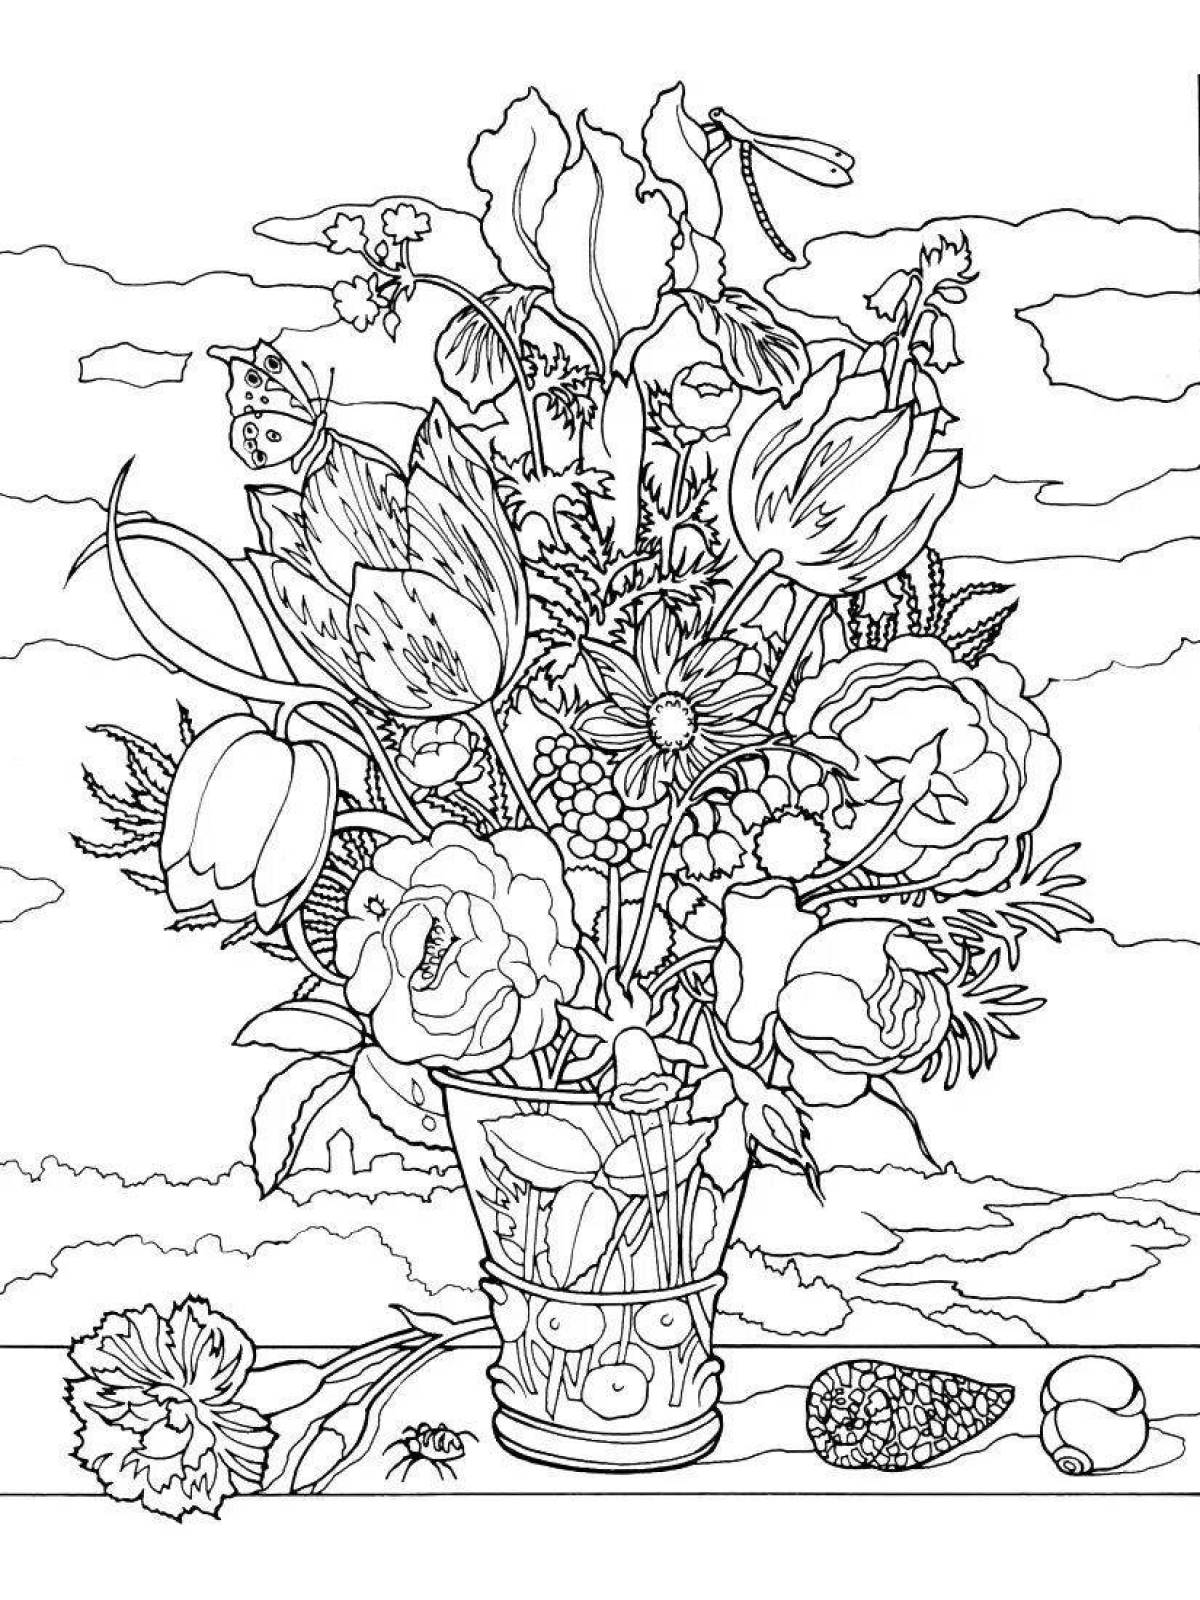 Coloring book cheerful bouquet in a vase